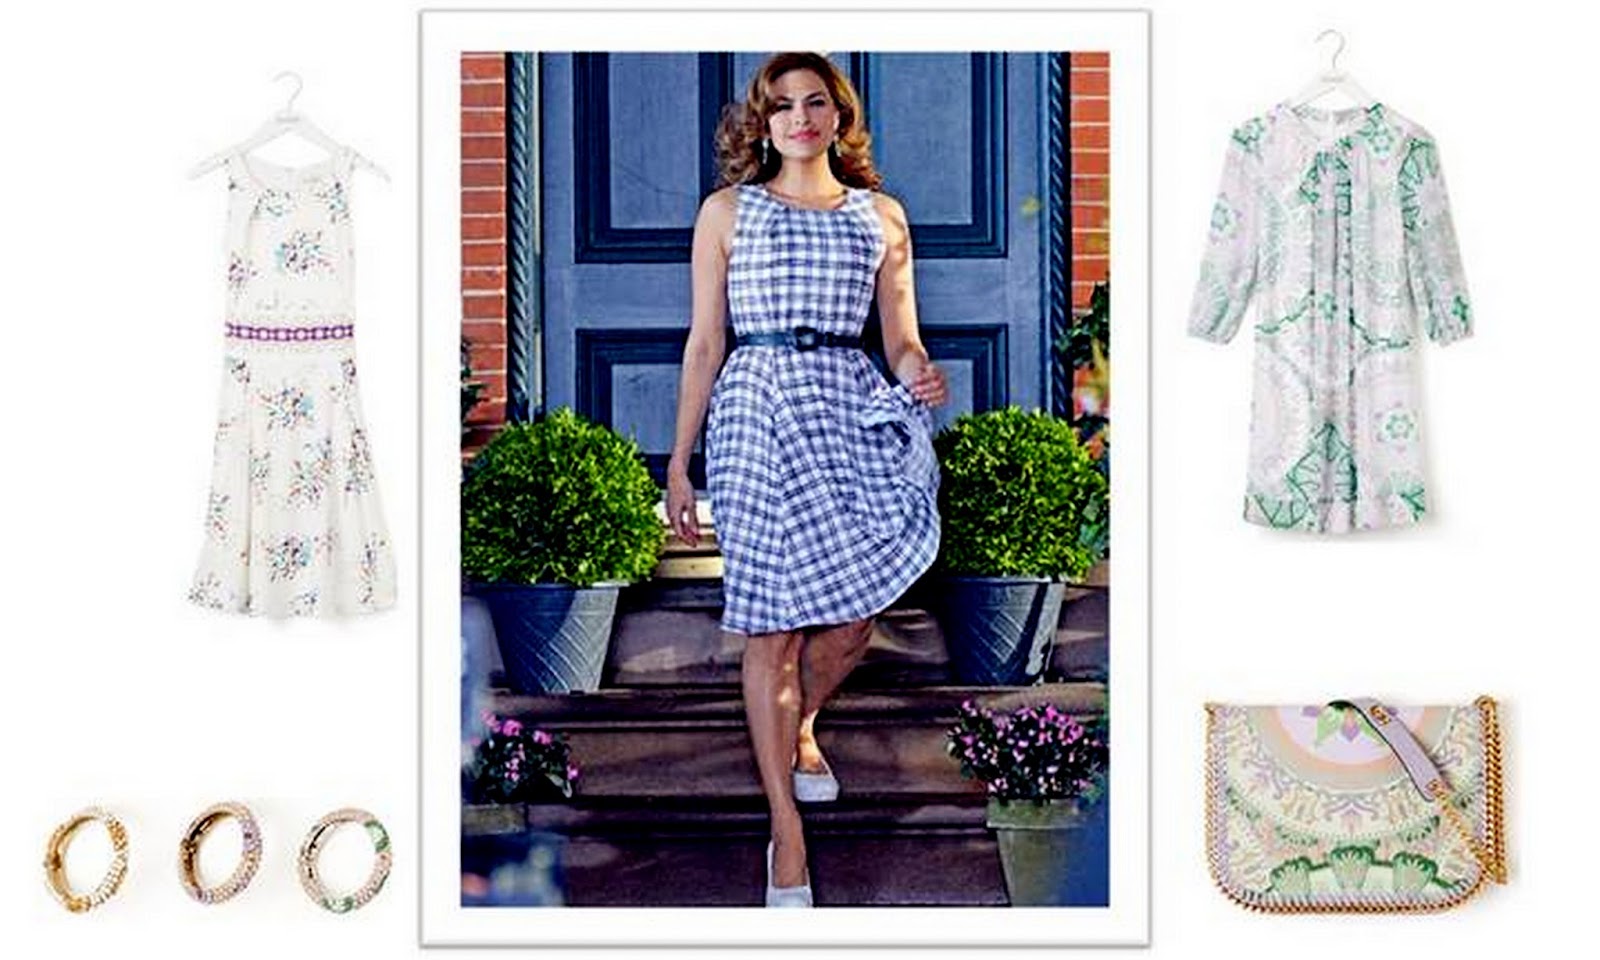 Eva Mendes Spring 2015 Collection is ‘All About the Glamour’